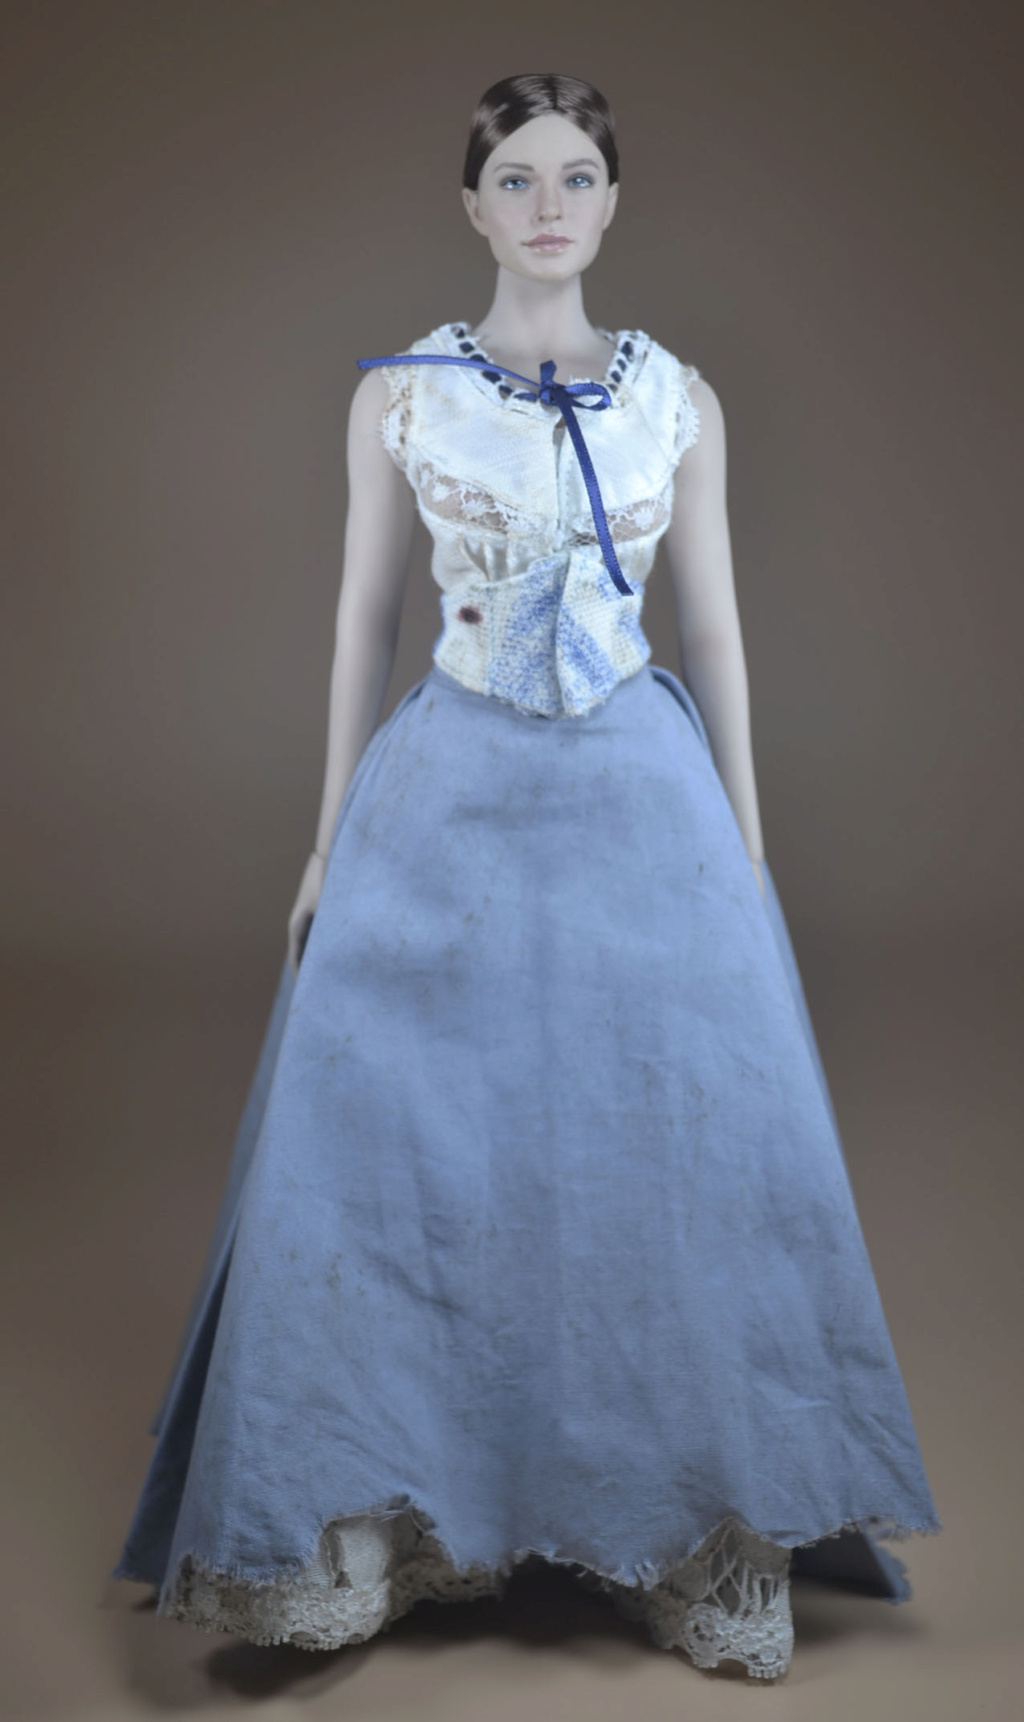 clothing - NEW PRODUCT: Wolford Toys: 1/6 Western Vintage Dress WF-2021AB _dsc3725